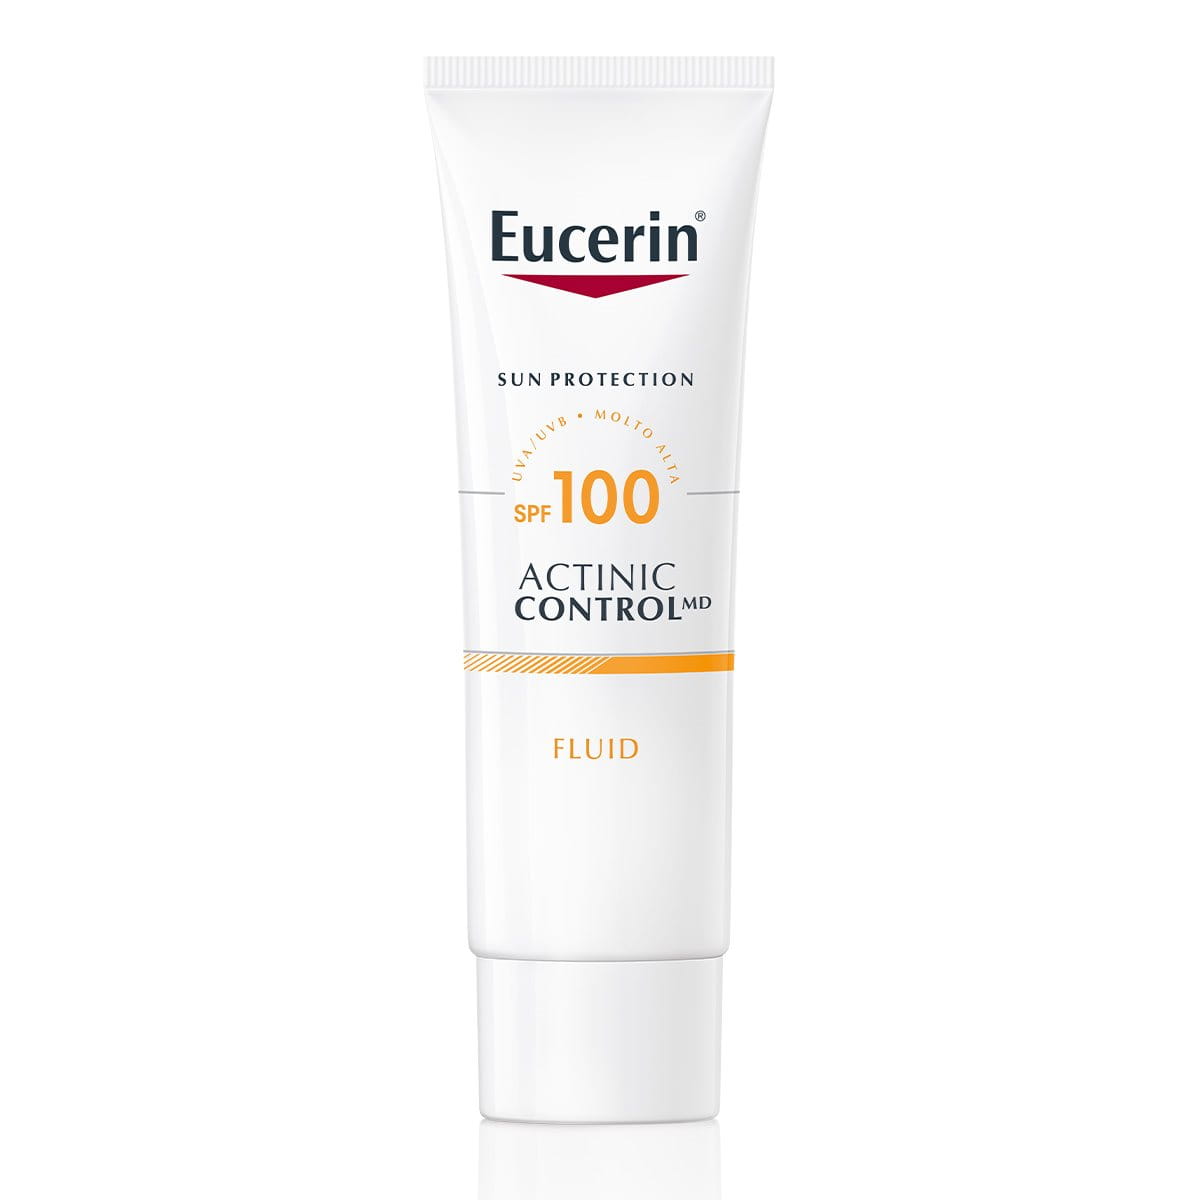 Actinic Control MD SPF 100 